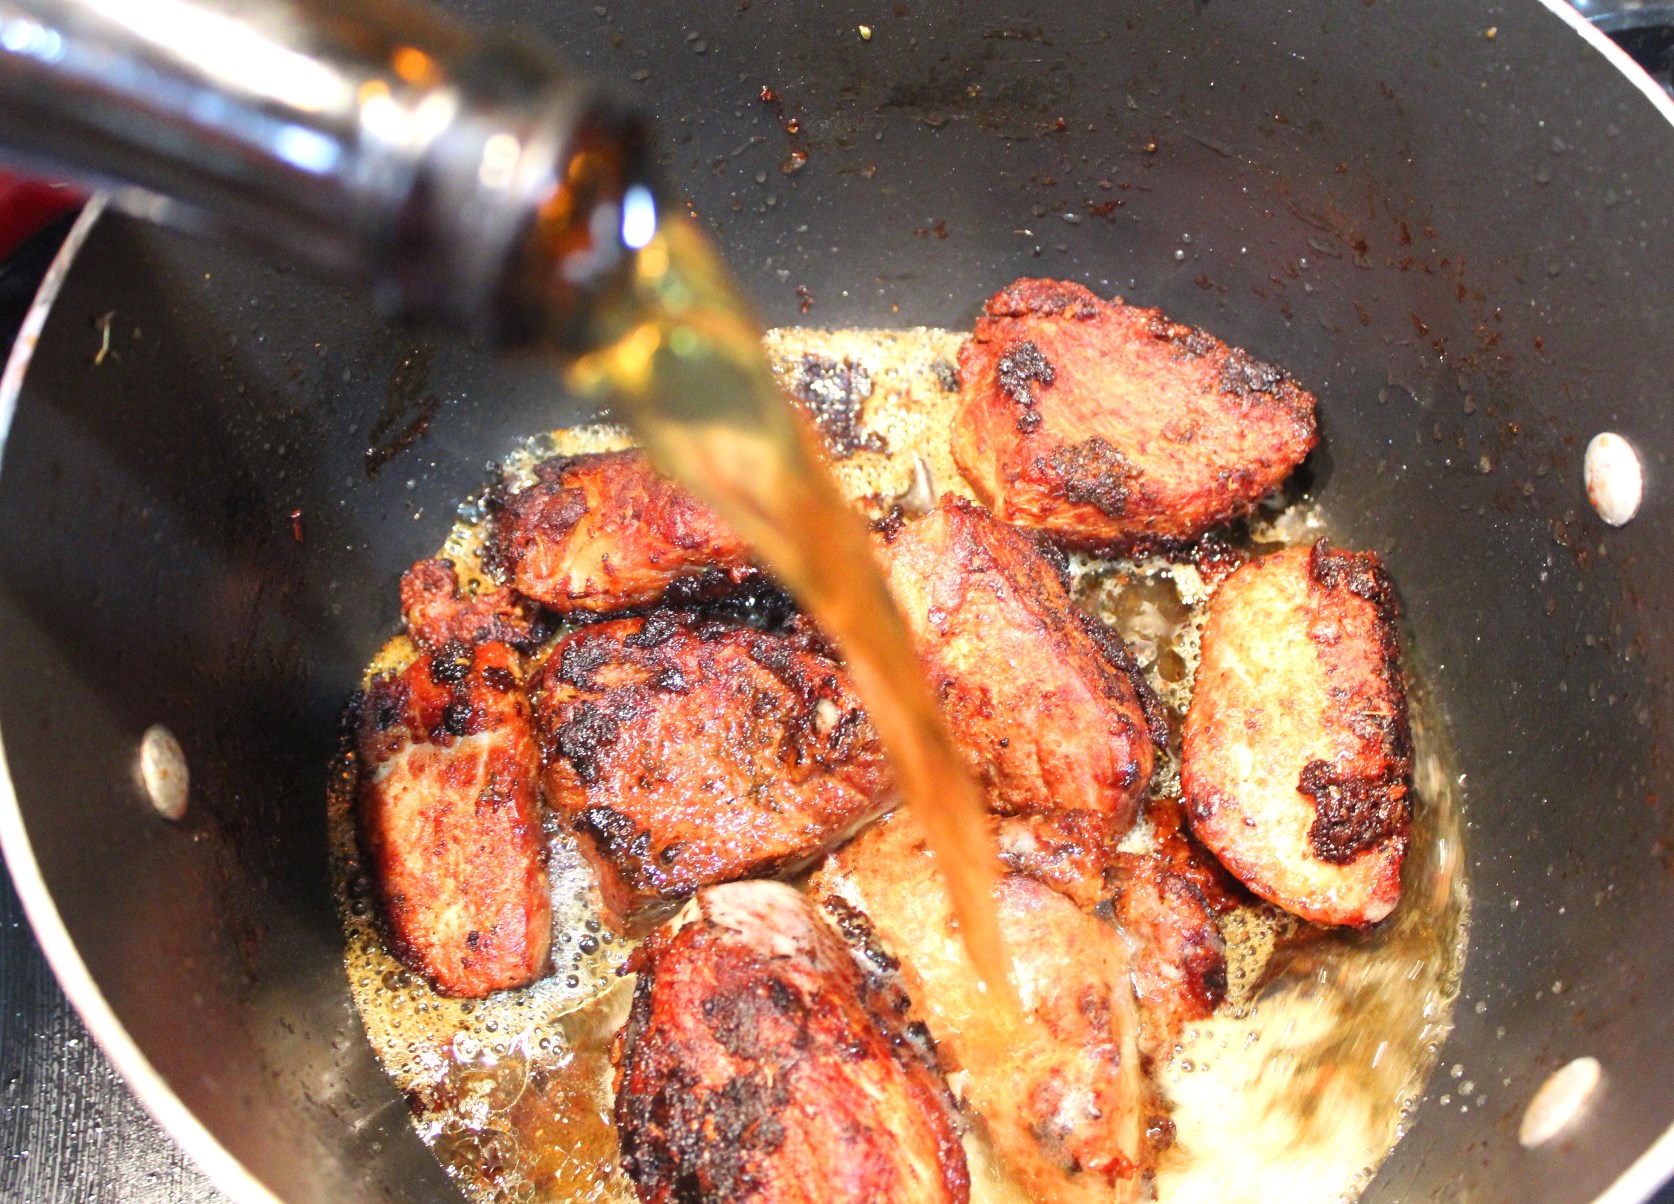 Adding beer to the pot with fried chicharron.